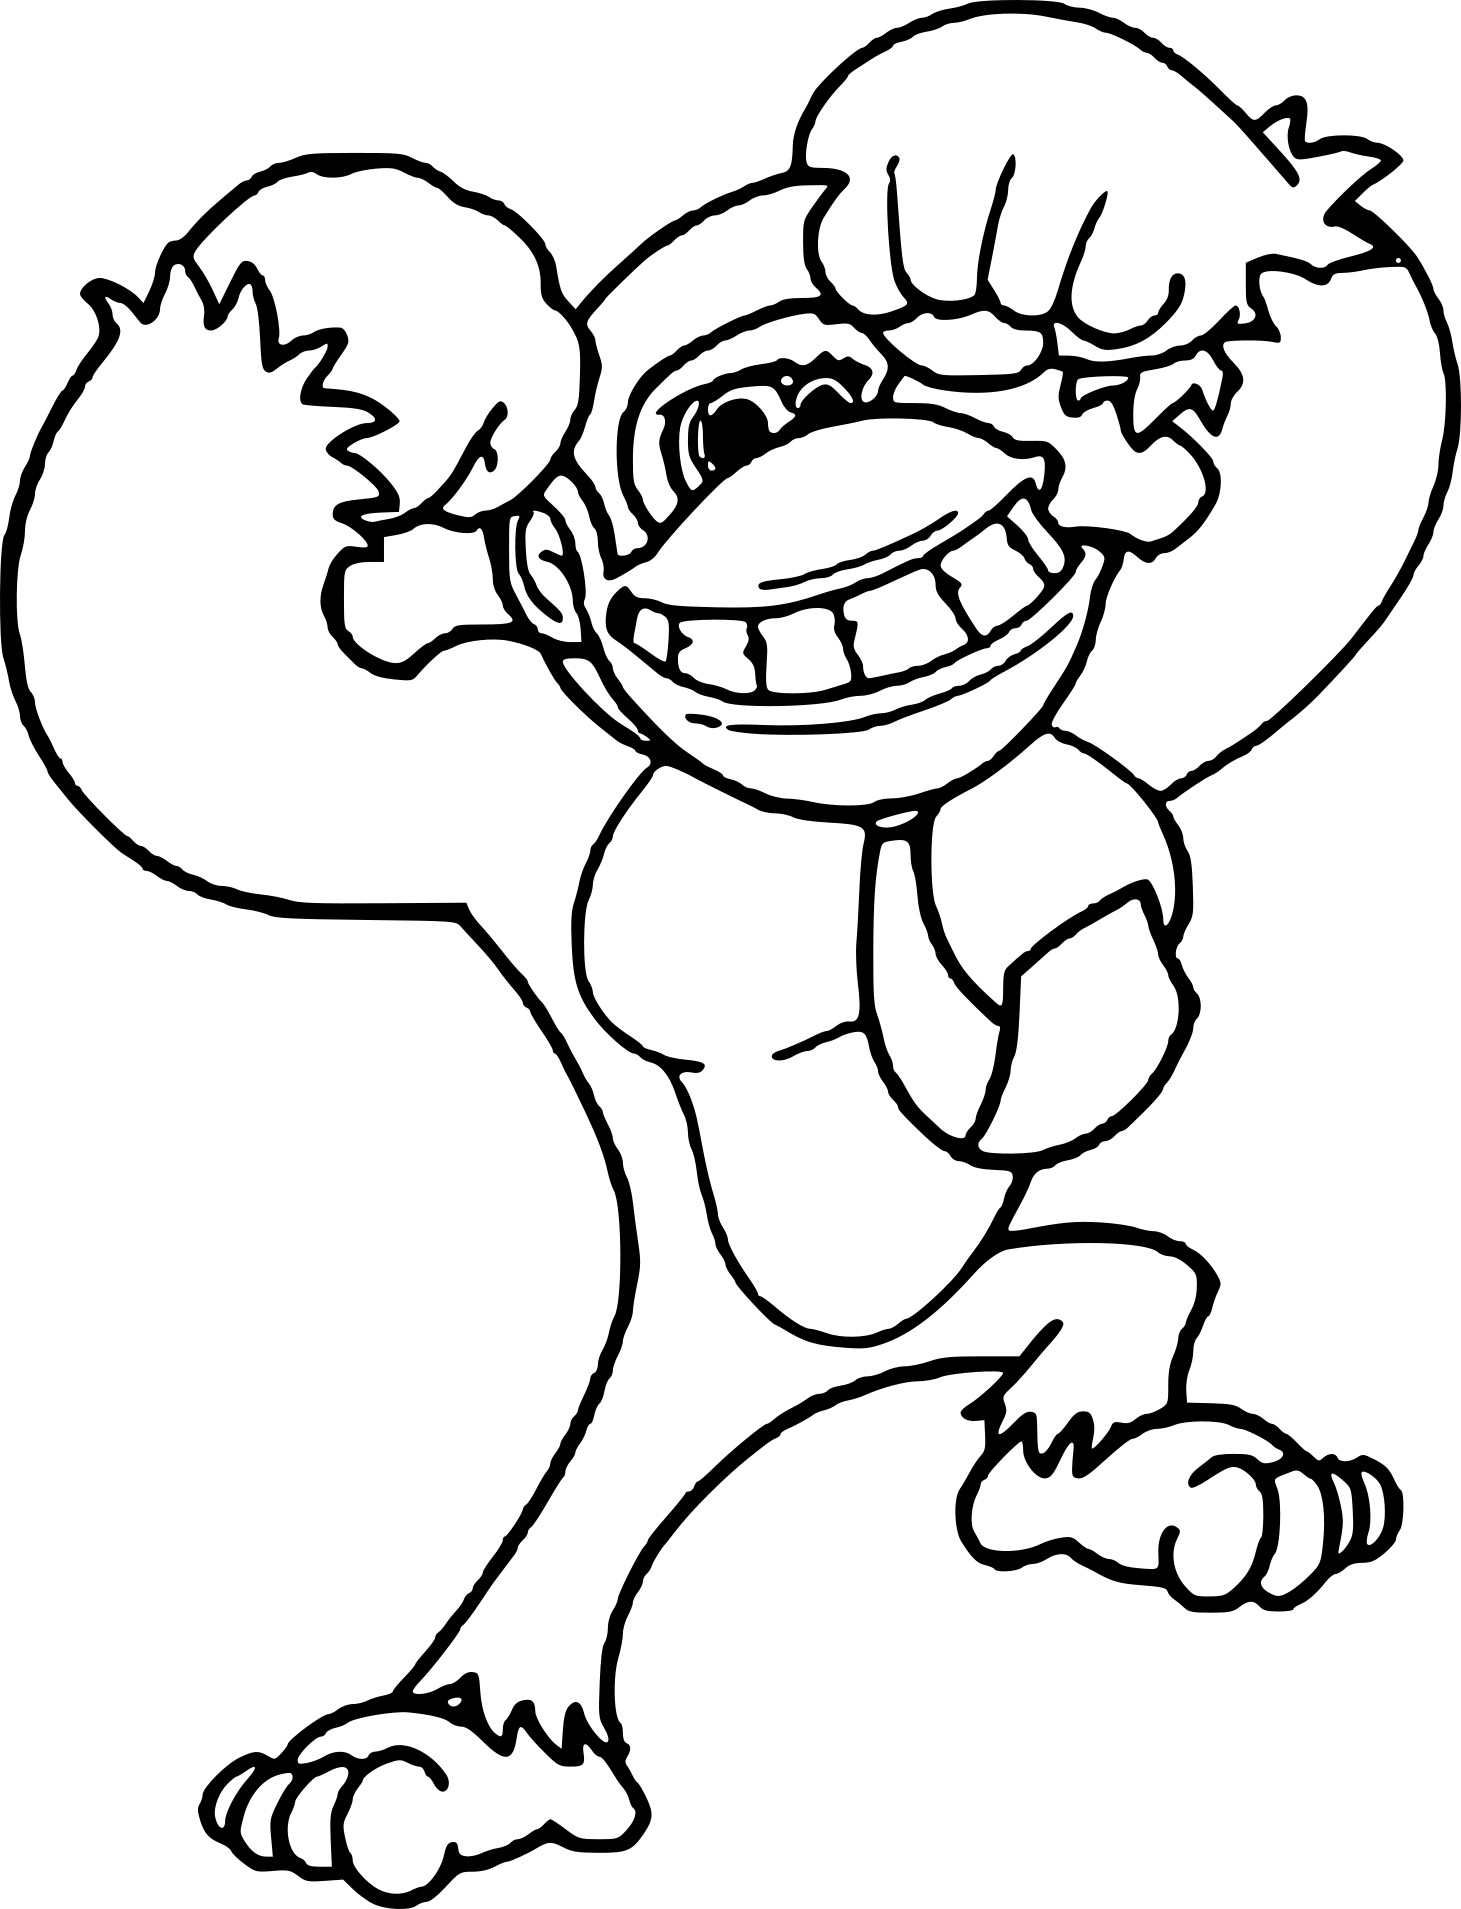 Free Donkey Kong coloring page - free printable coloring pages on  coloori.com